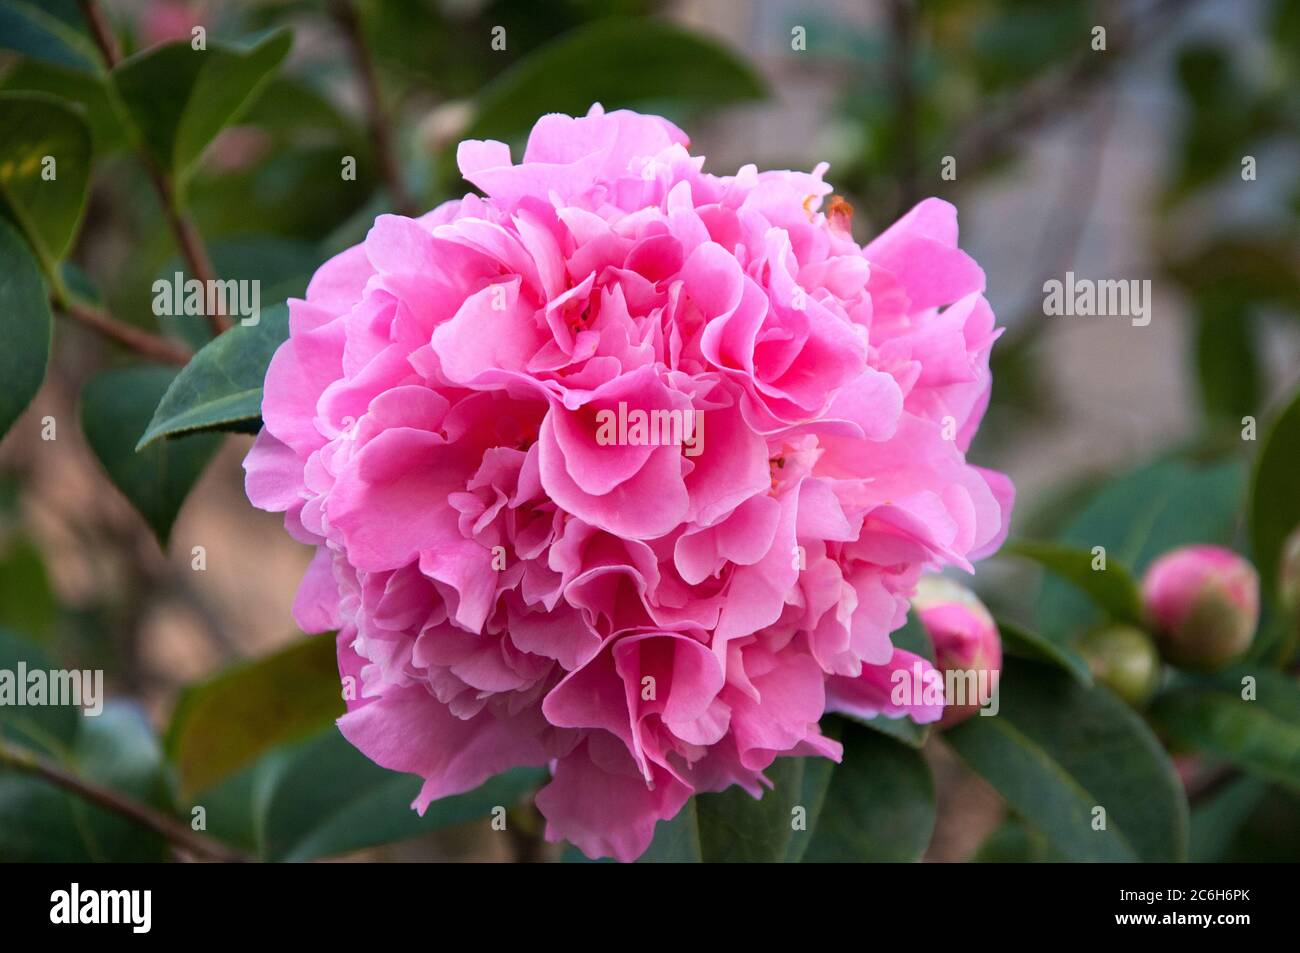 Double camellia, c. japonica, flowering in southeastern Australia, July 2020 Stock Photo